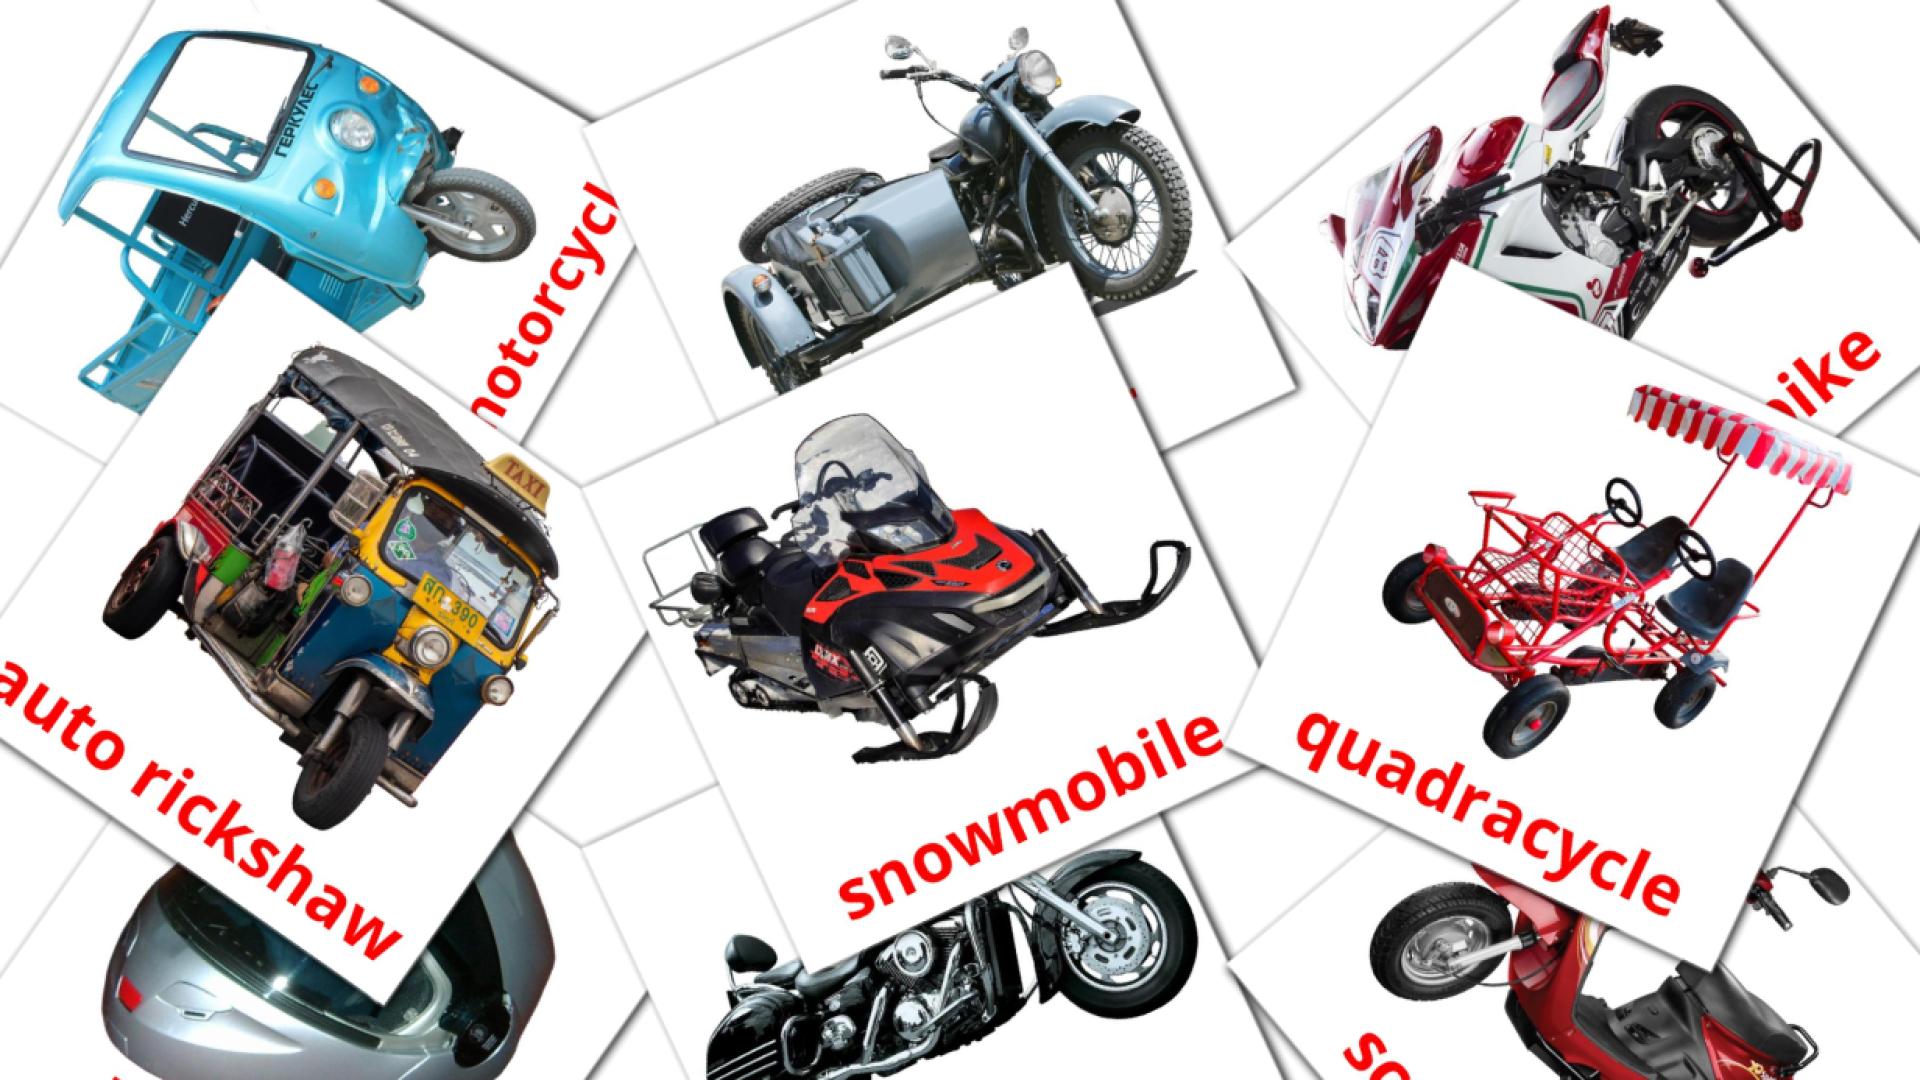 14 Motorcycles flashcards